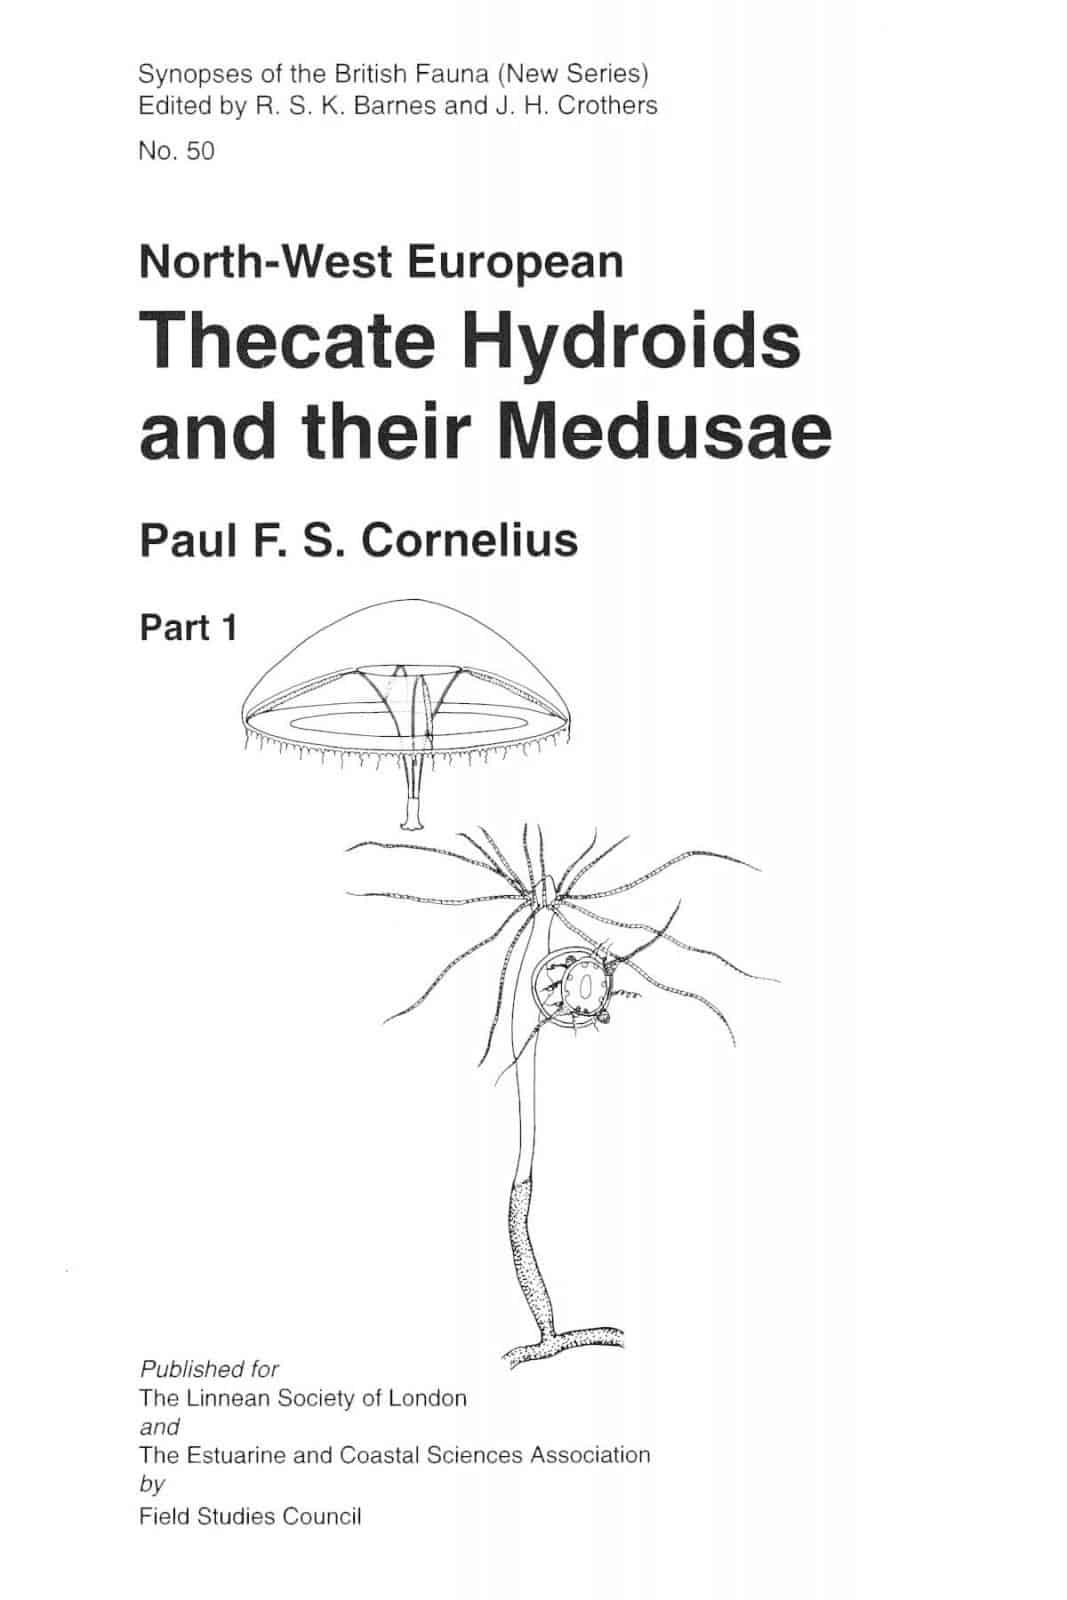 Thecate hydroids 1